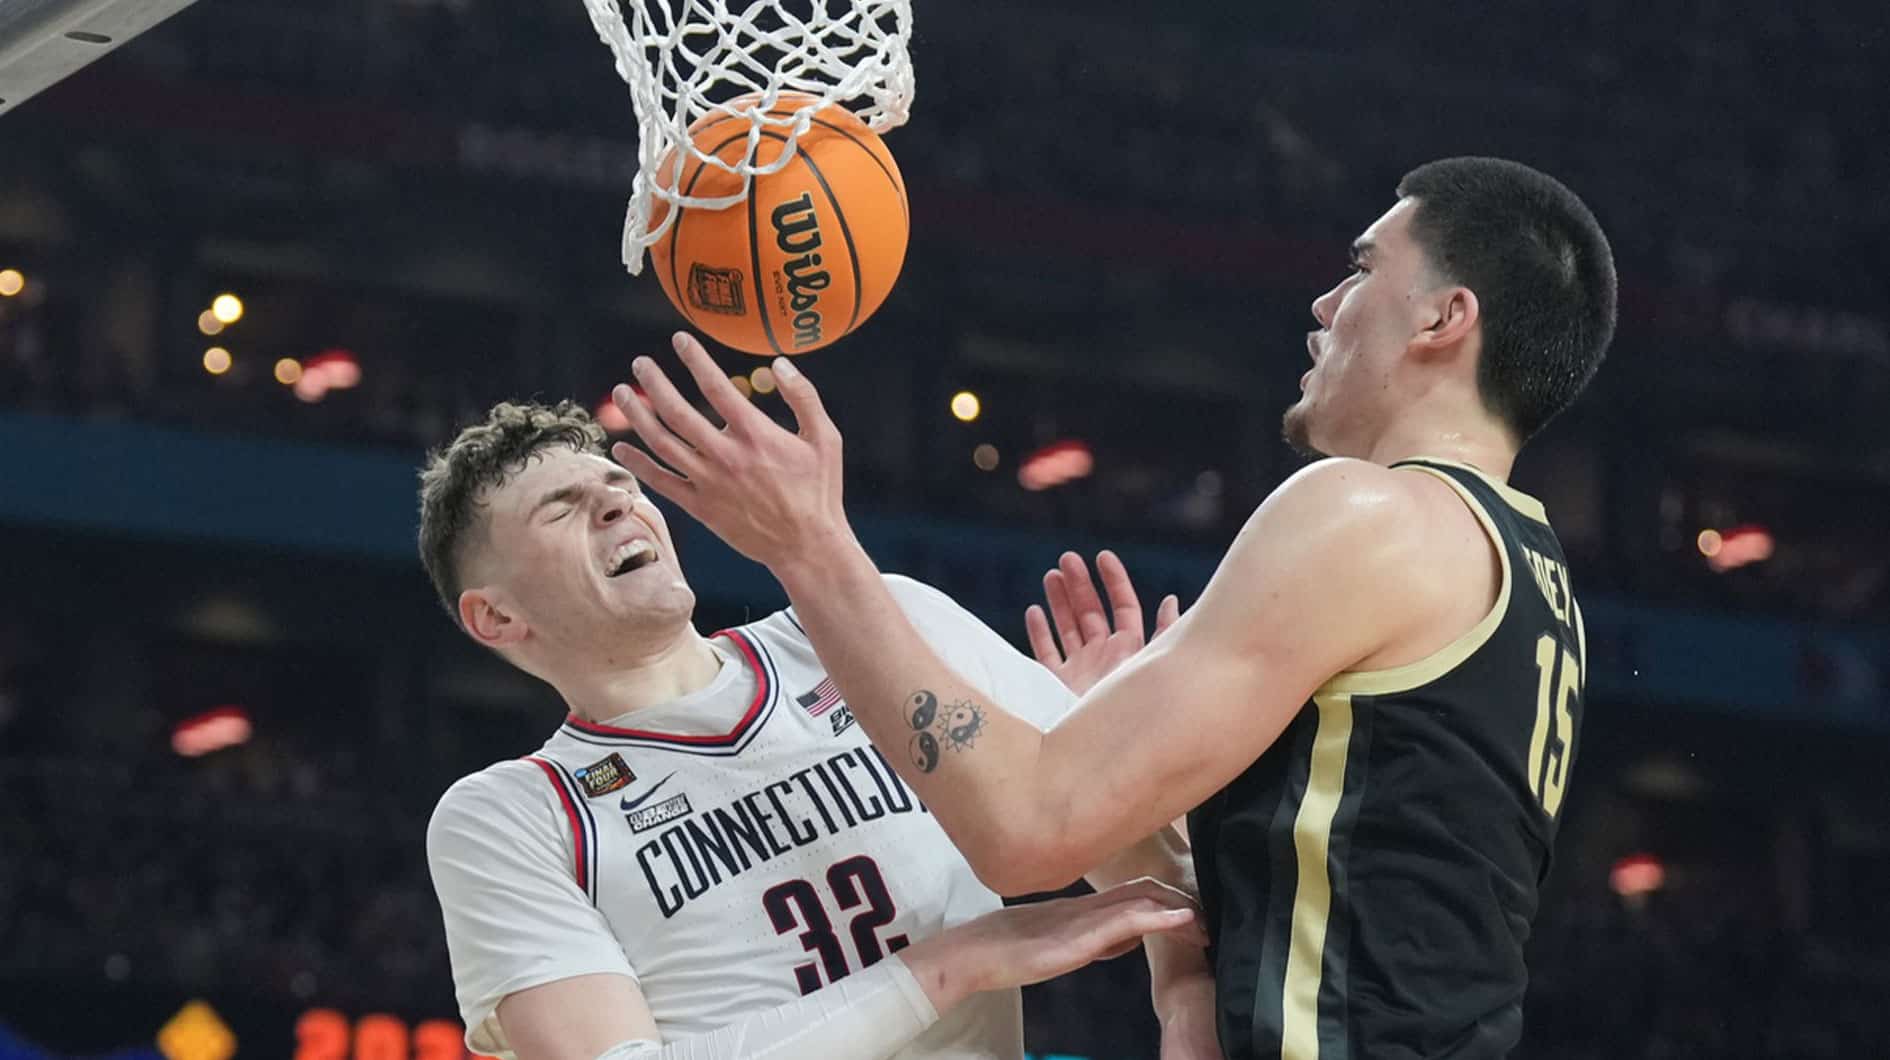 Apr 8, 2024; Glendale, AZ, USA; Purdue Boilermakers center Zach Edey (15) and Connecticut Huskies center Donovan Clingan (32) battle for the ball in the national championship game of the Final Four of the 2024 NCAA Tournament at State Farm Stadium. Mandatory Credit: Robert Deutsch-USA TODAY Sports